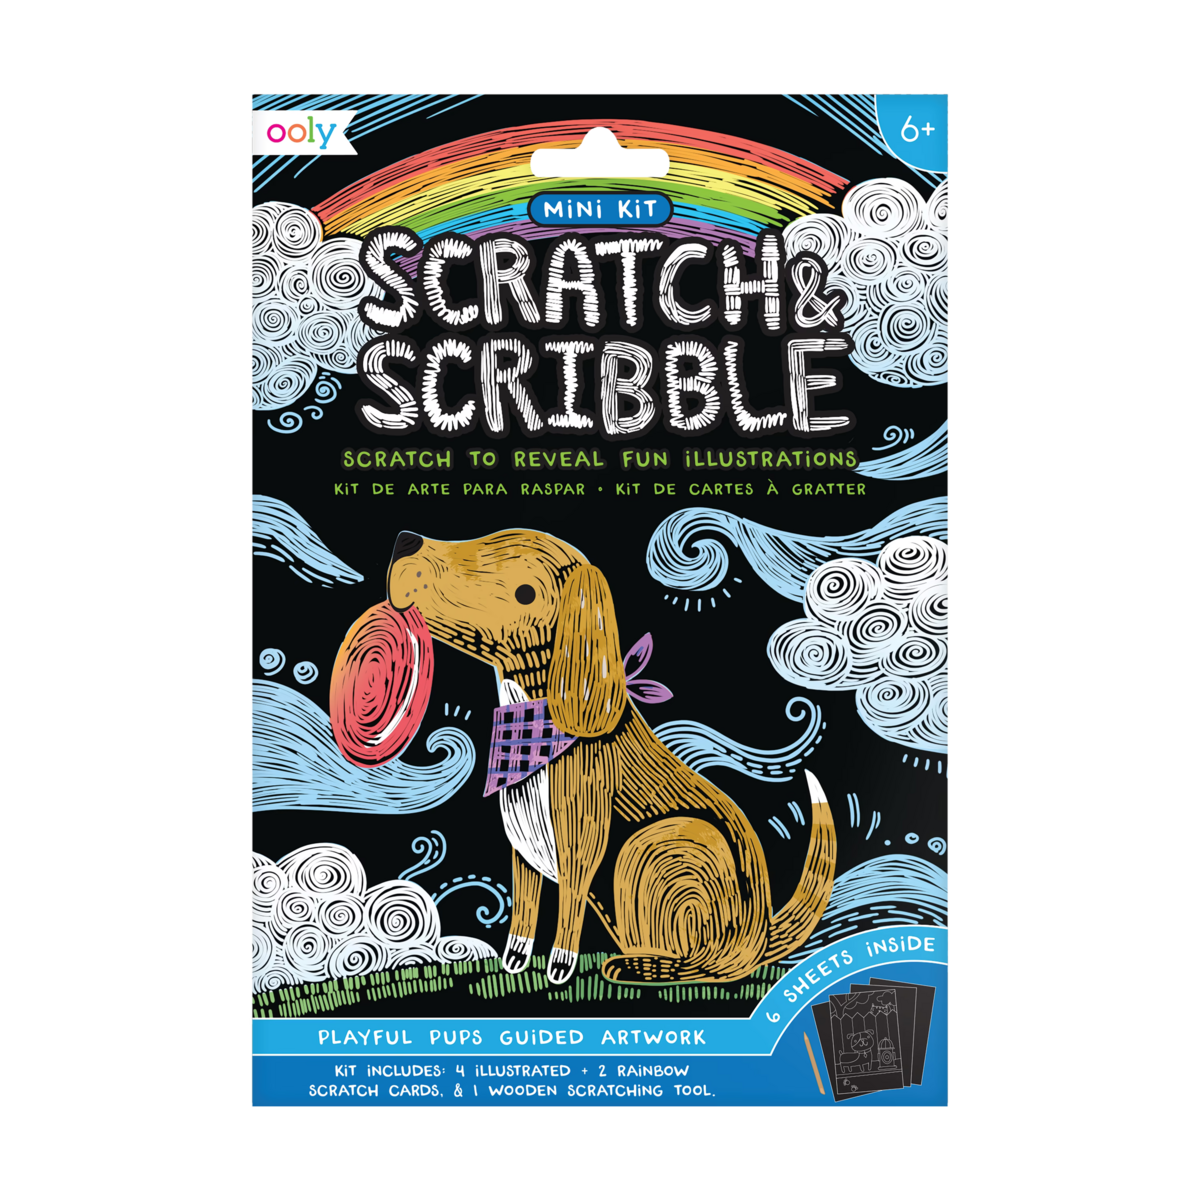 Playful Pups Scratch and Scribble Mini Scratch Art Kit inside package (front)